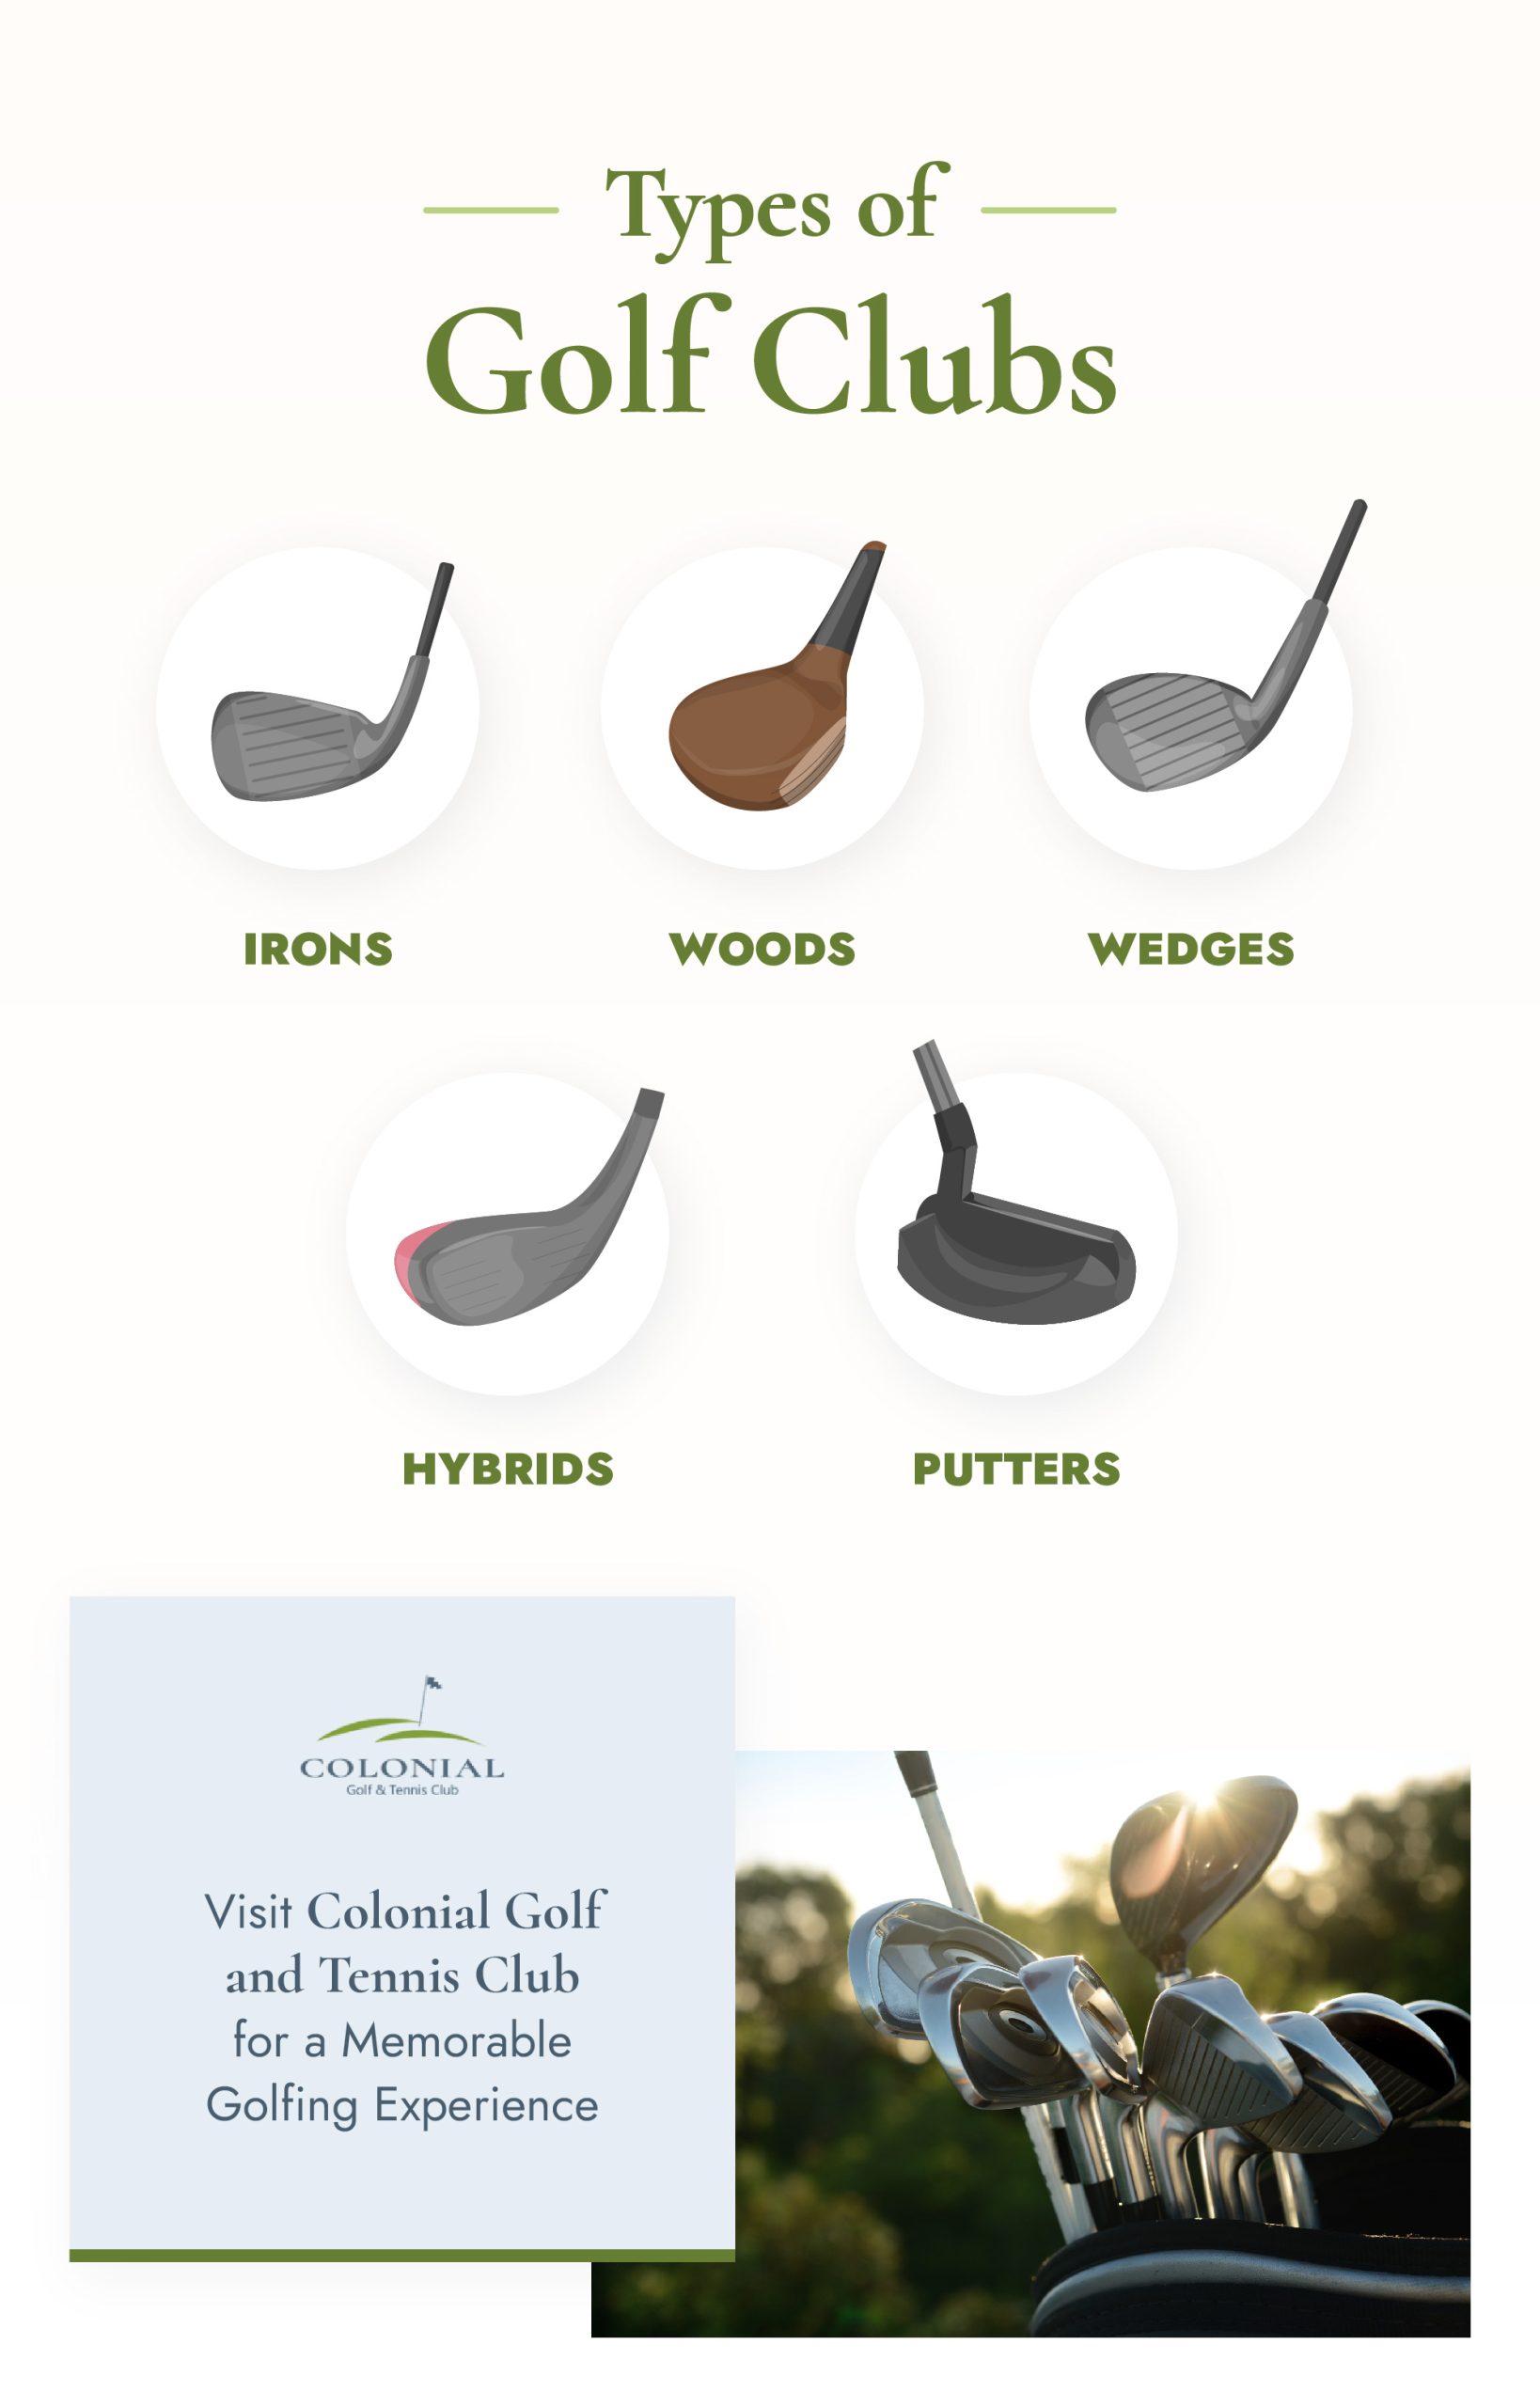 Types of Golf Clubs